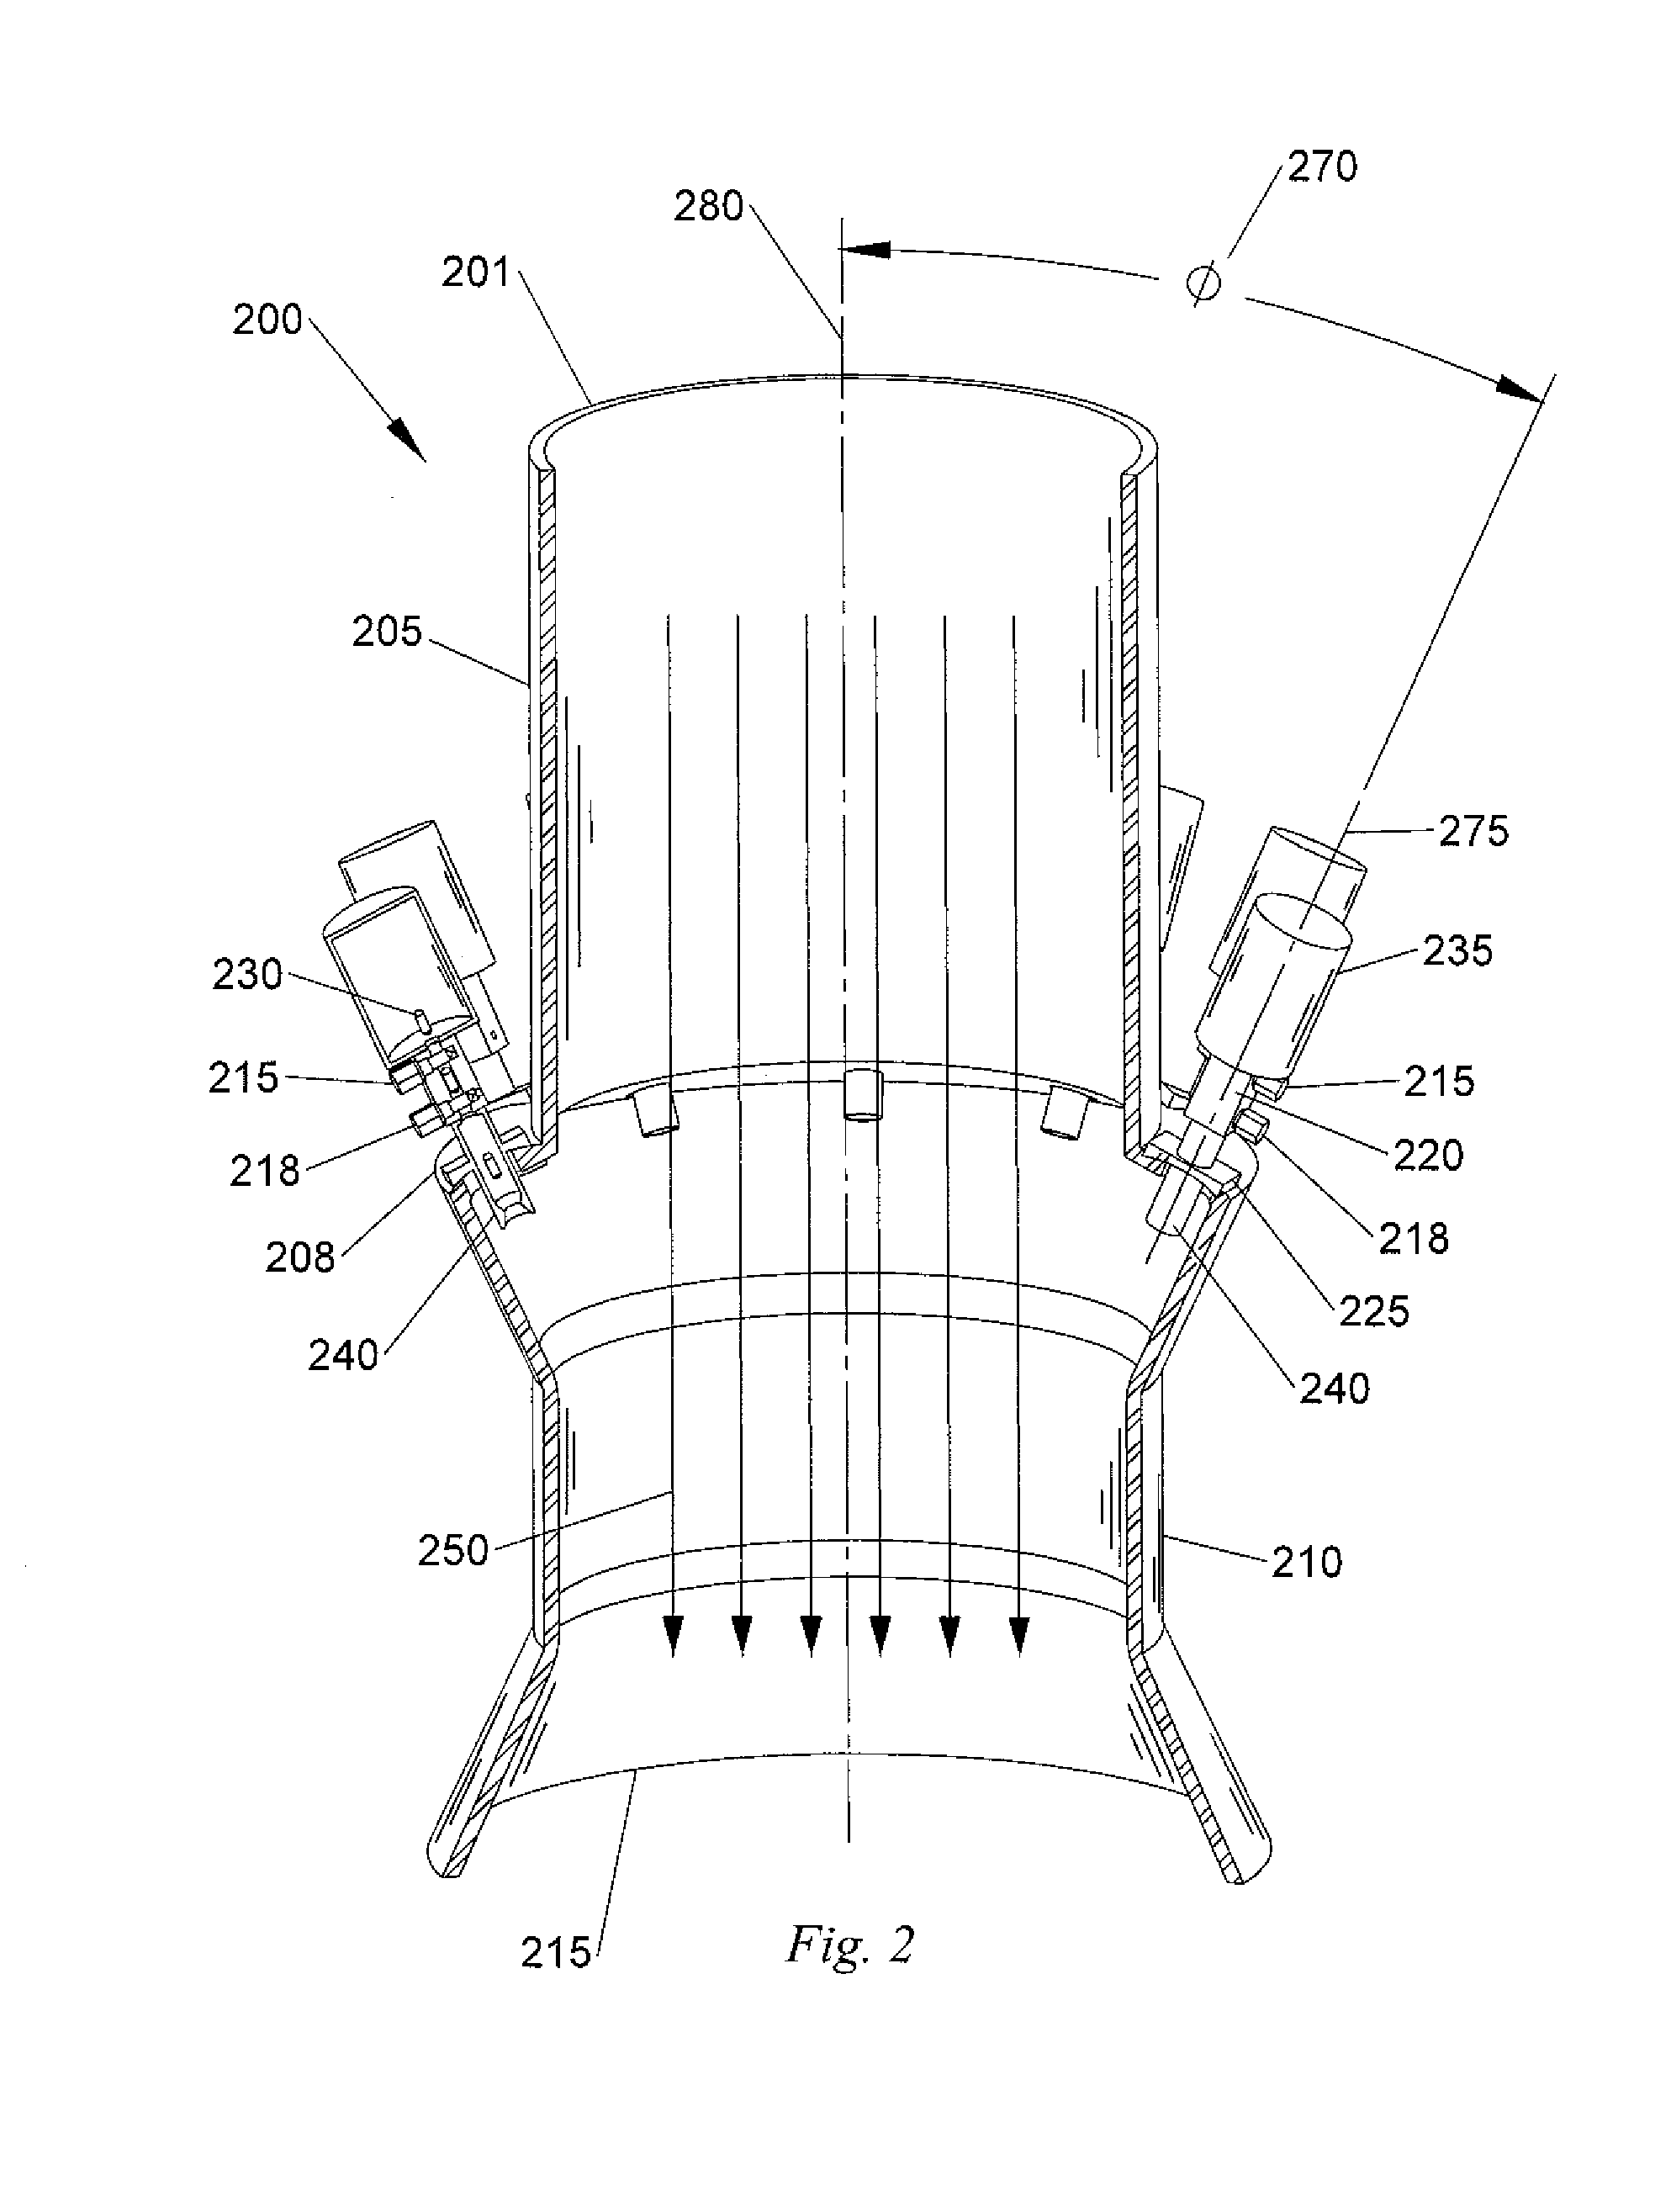 Packaged propellant air-induced variable thrust rocket engine